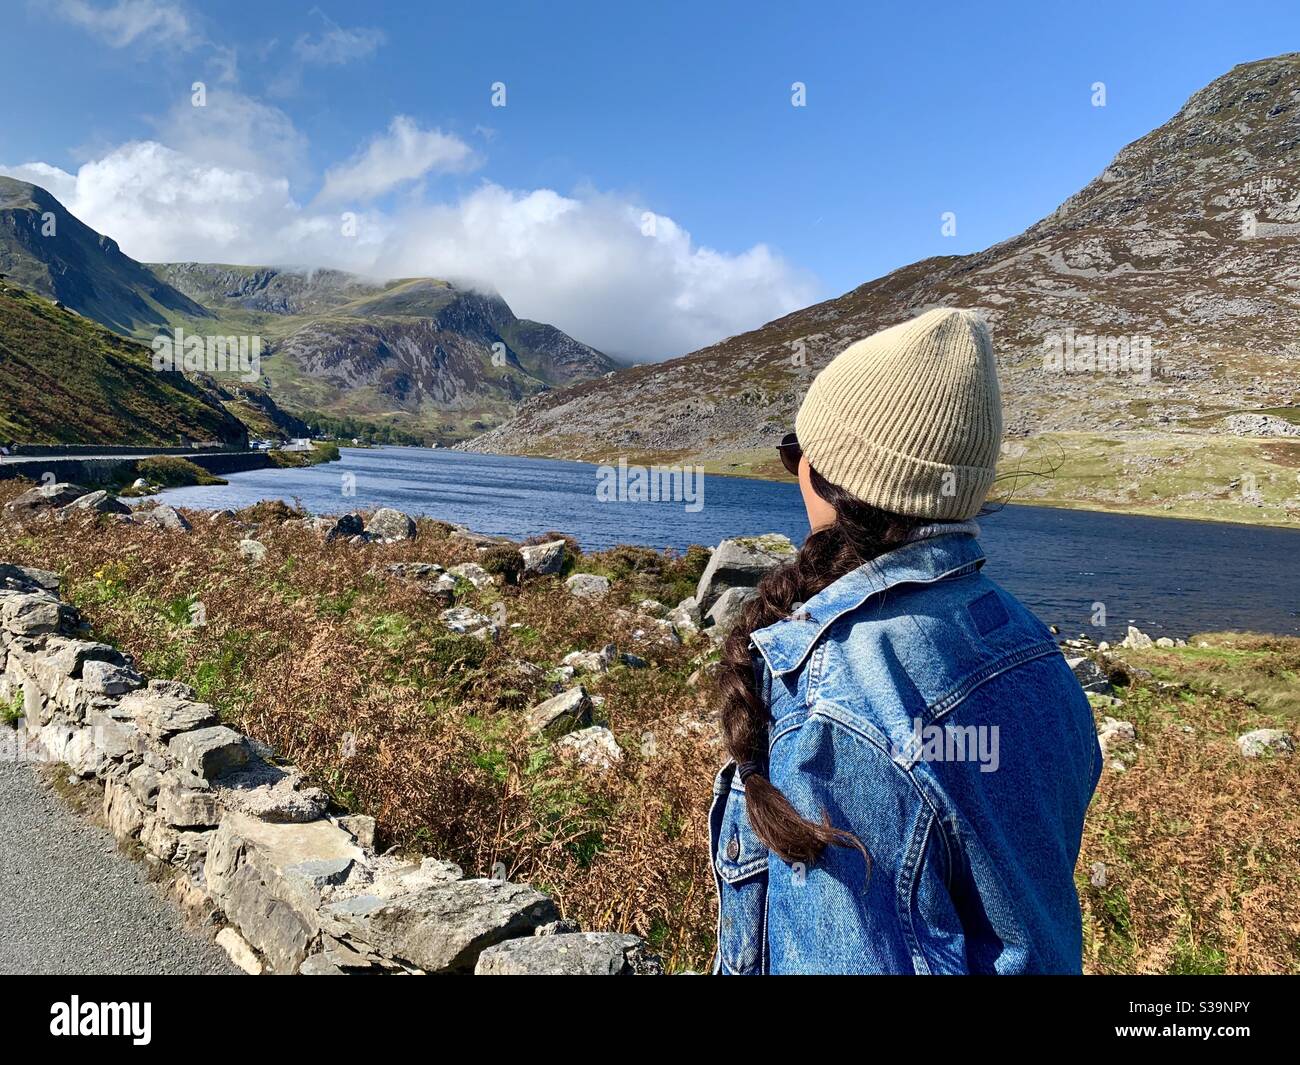 Woman looks out across the lake in Snowdonia, Wales. Stock Photo